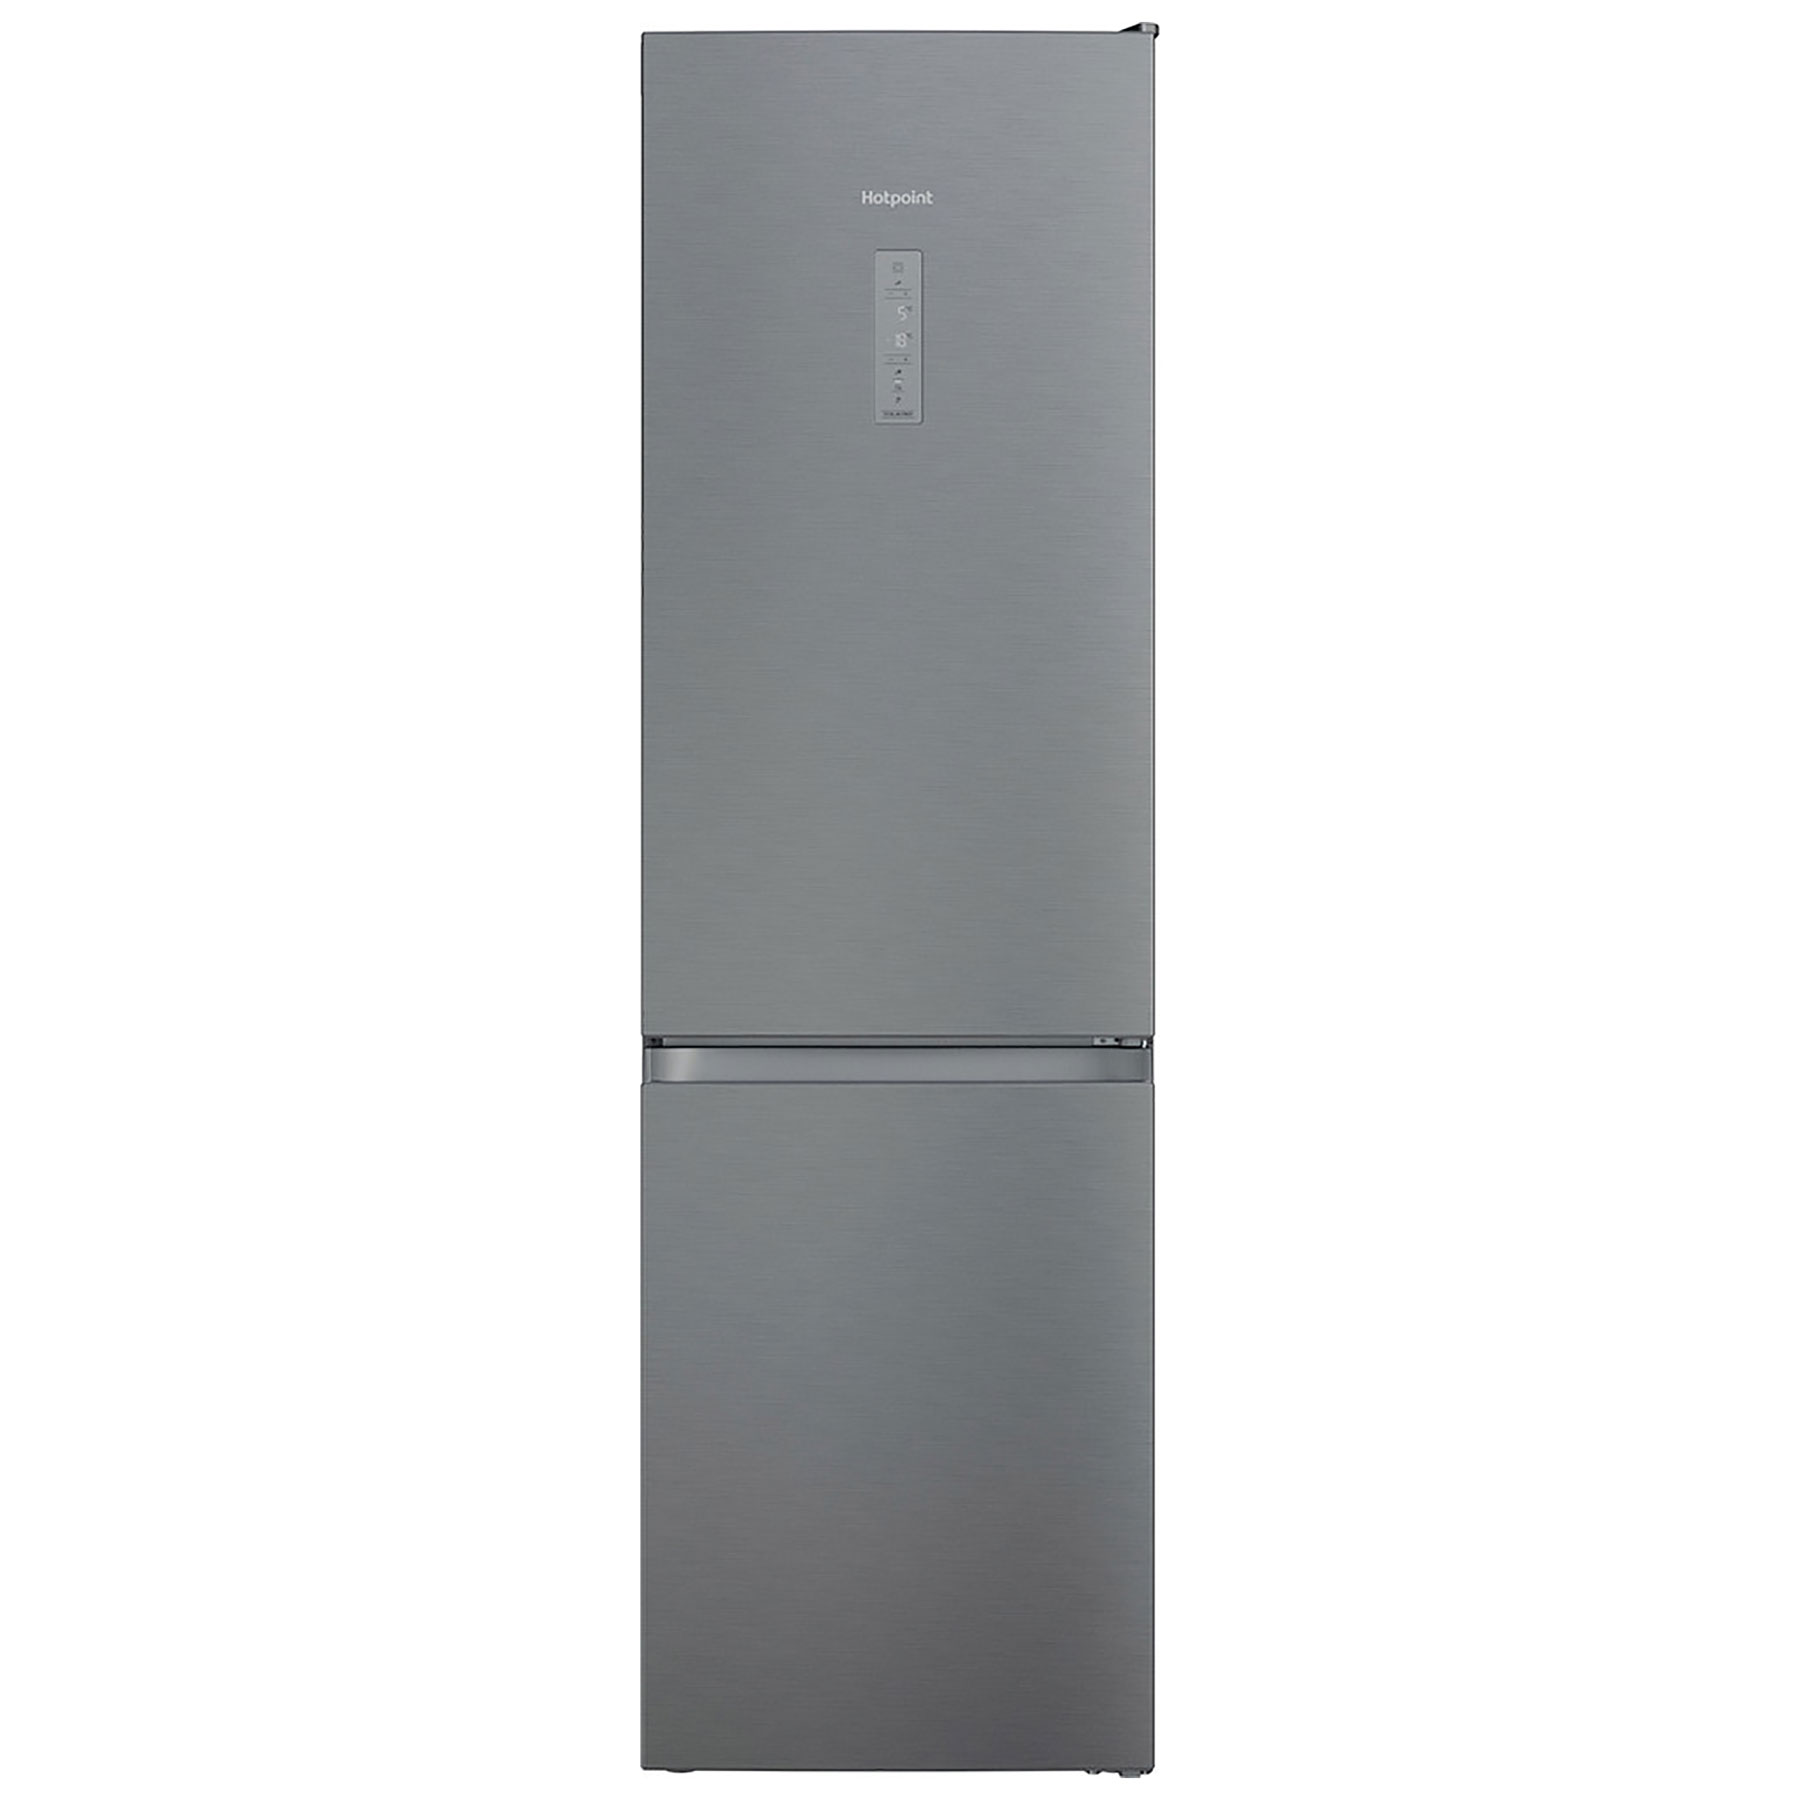 Image of Hotpoint H9X94TSX 60cm Frost Free Fridge Freezer in Steel 2 03m C Rate